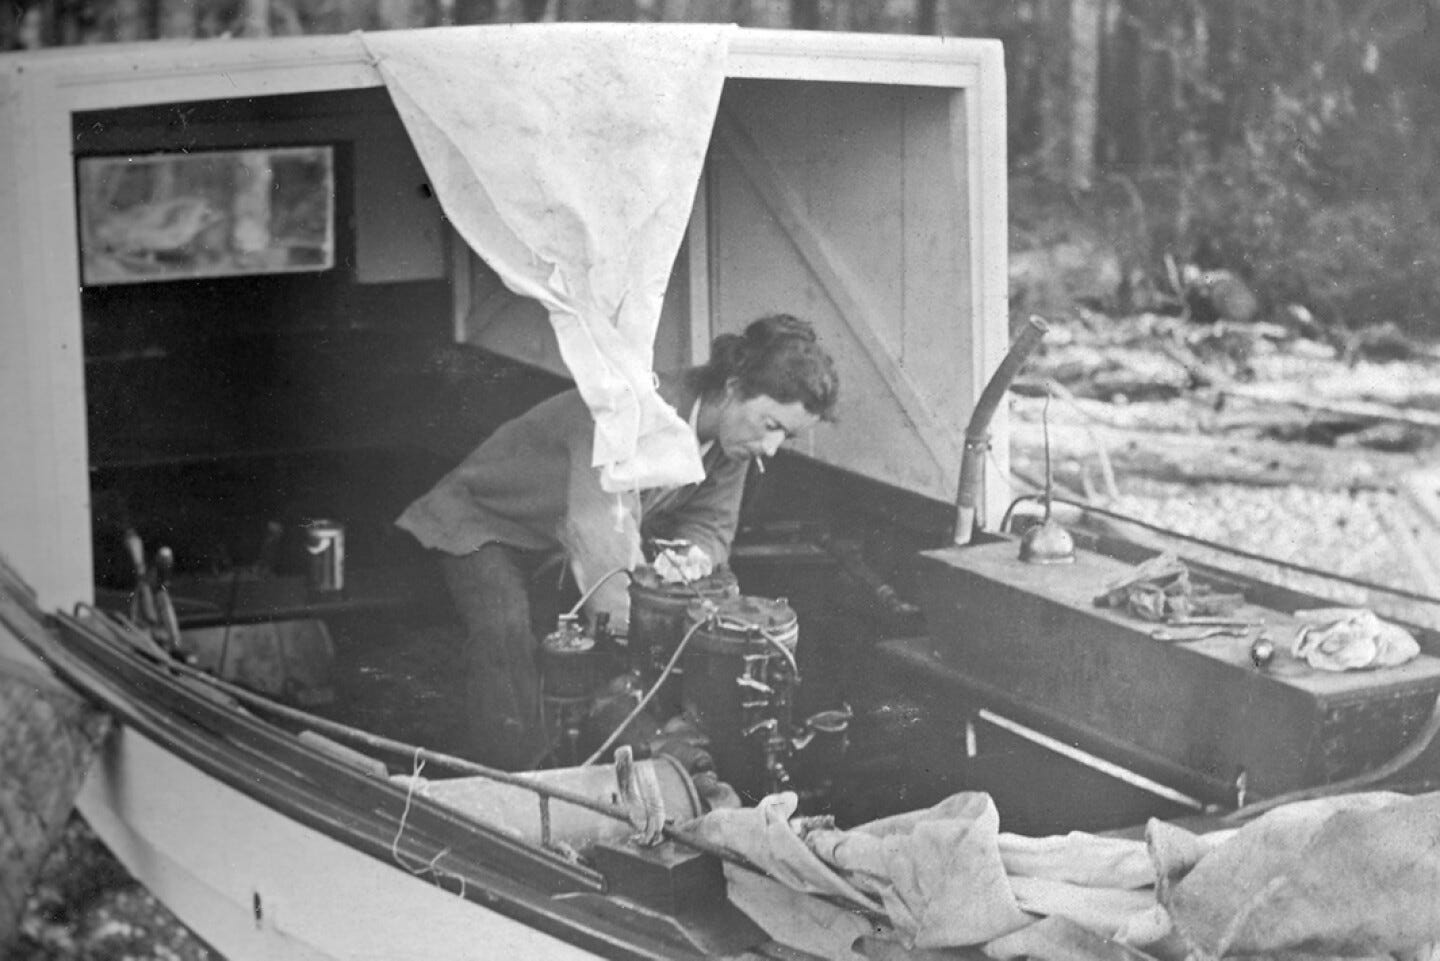 Bland working on a boat in the Quatsino Sound